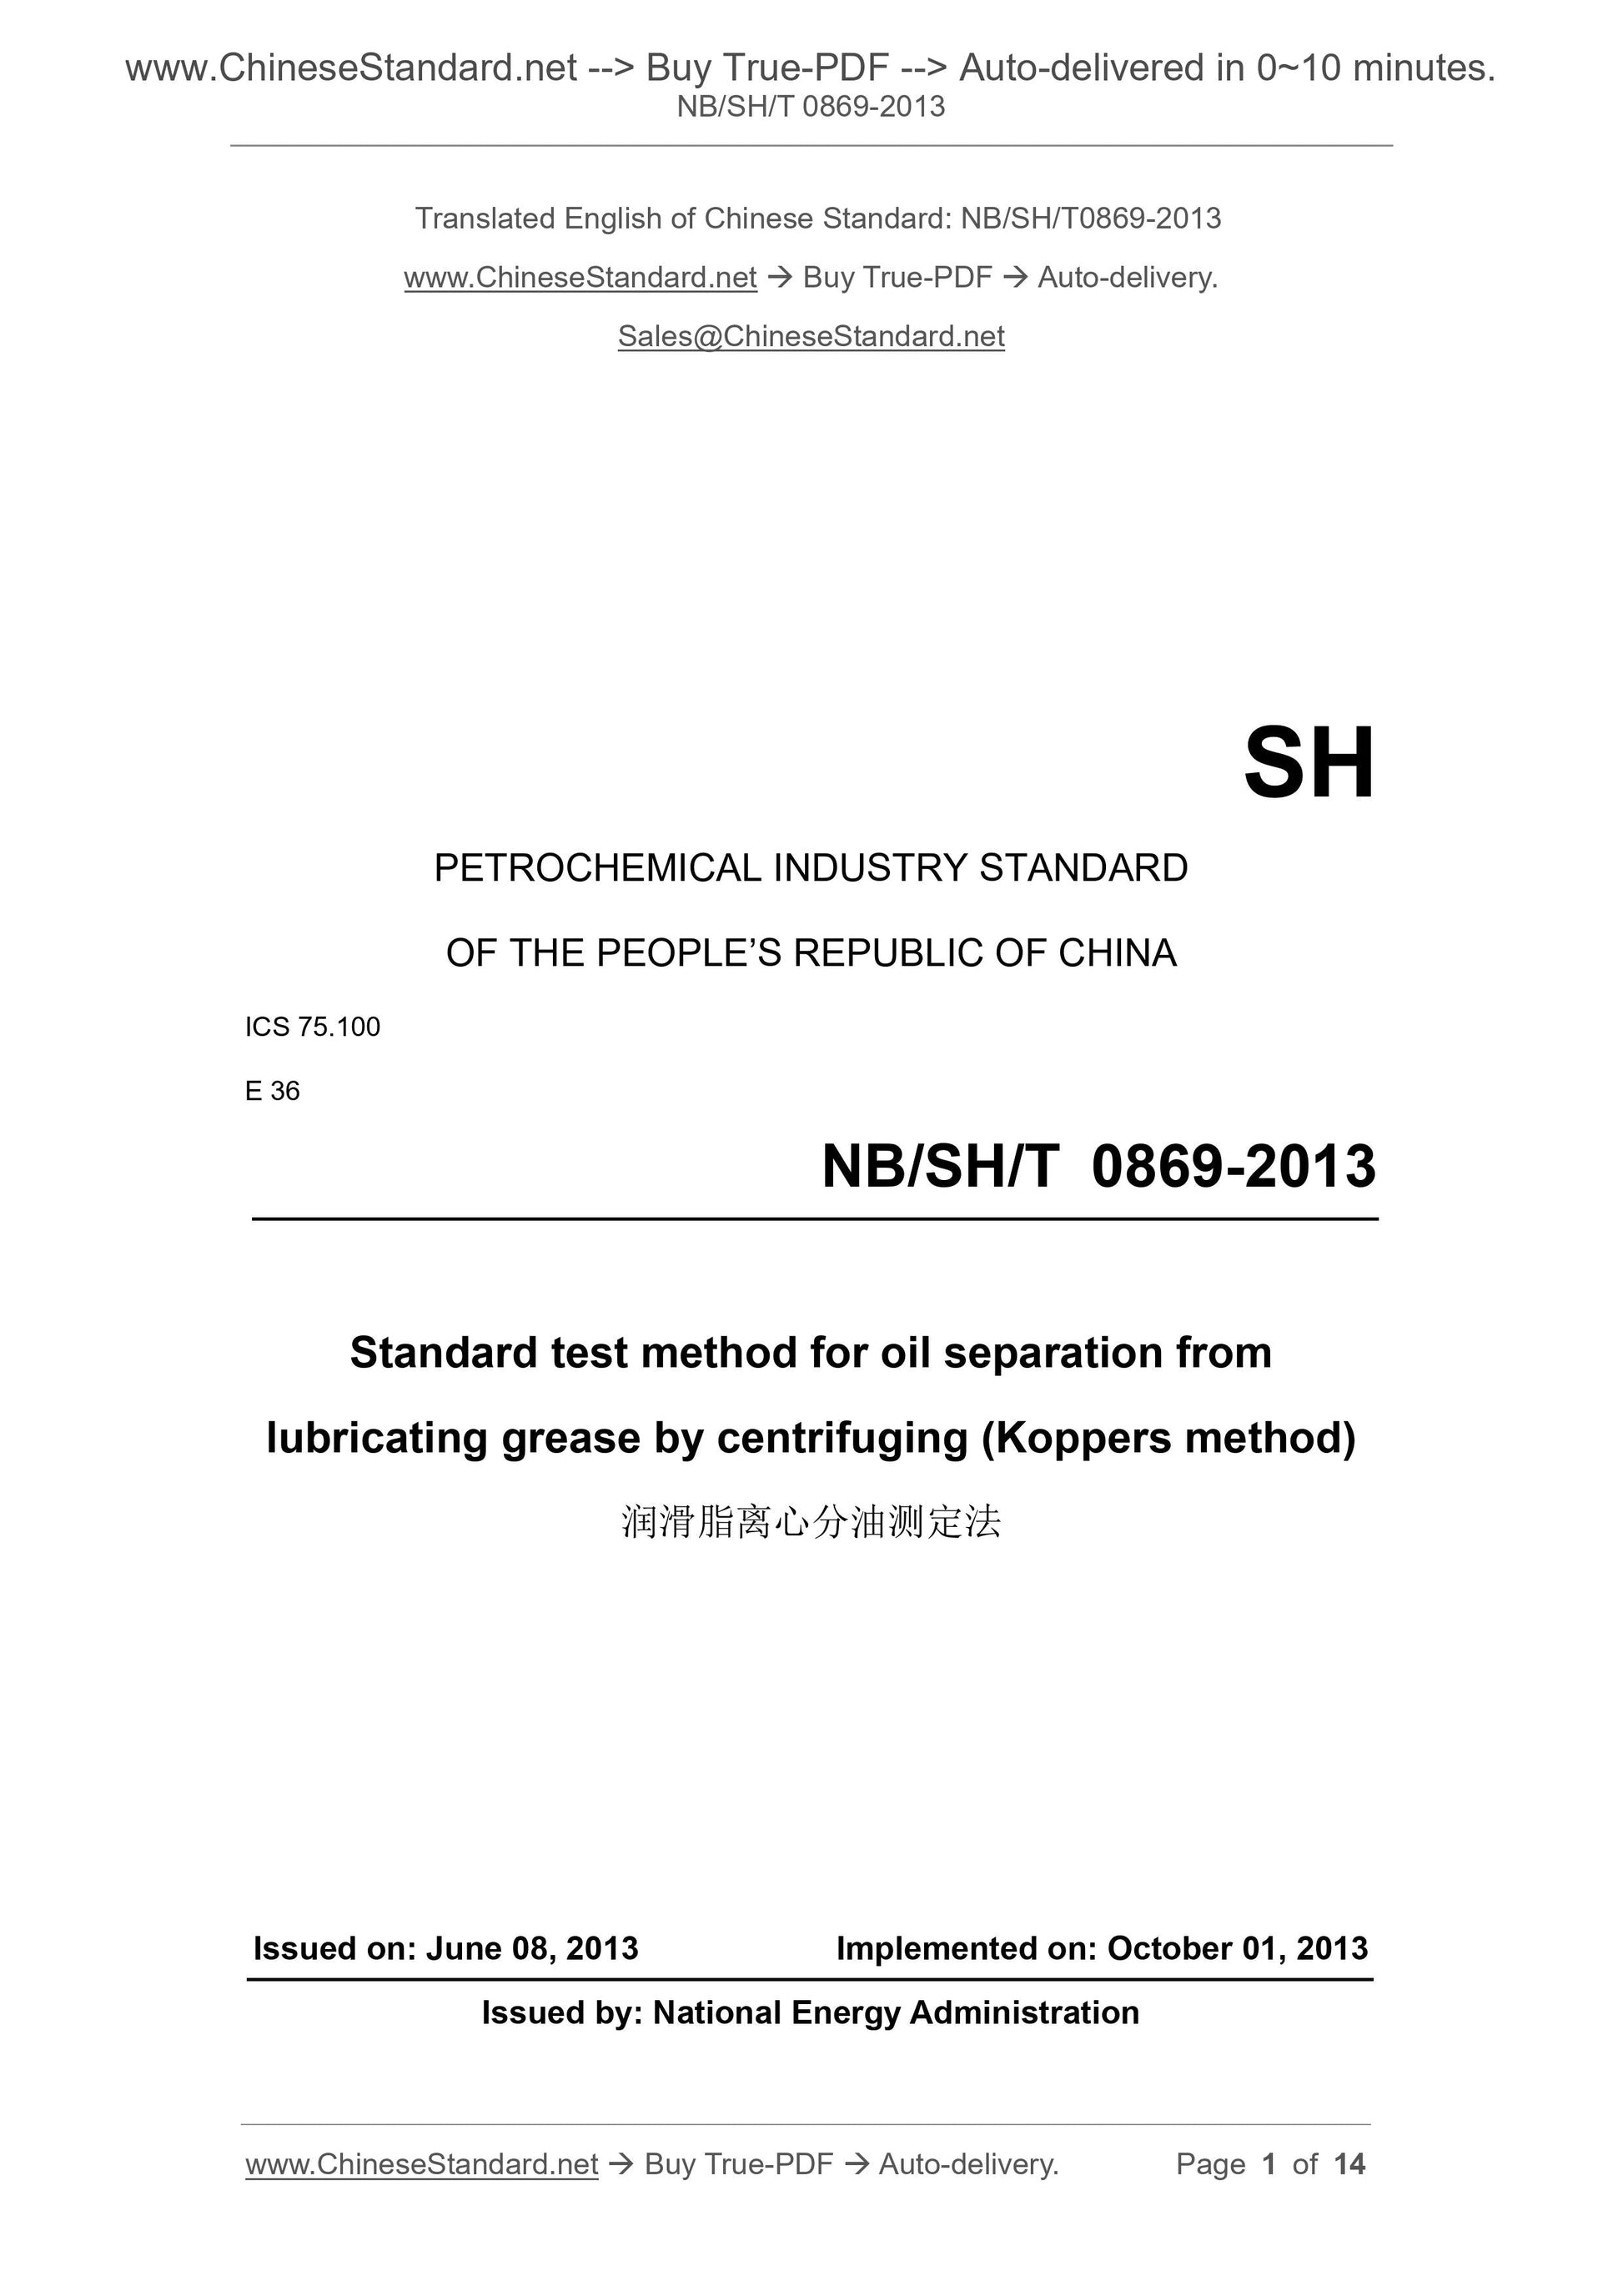 NB/SH/T 0869-2013 Page 1